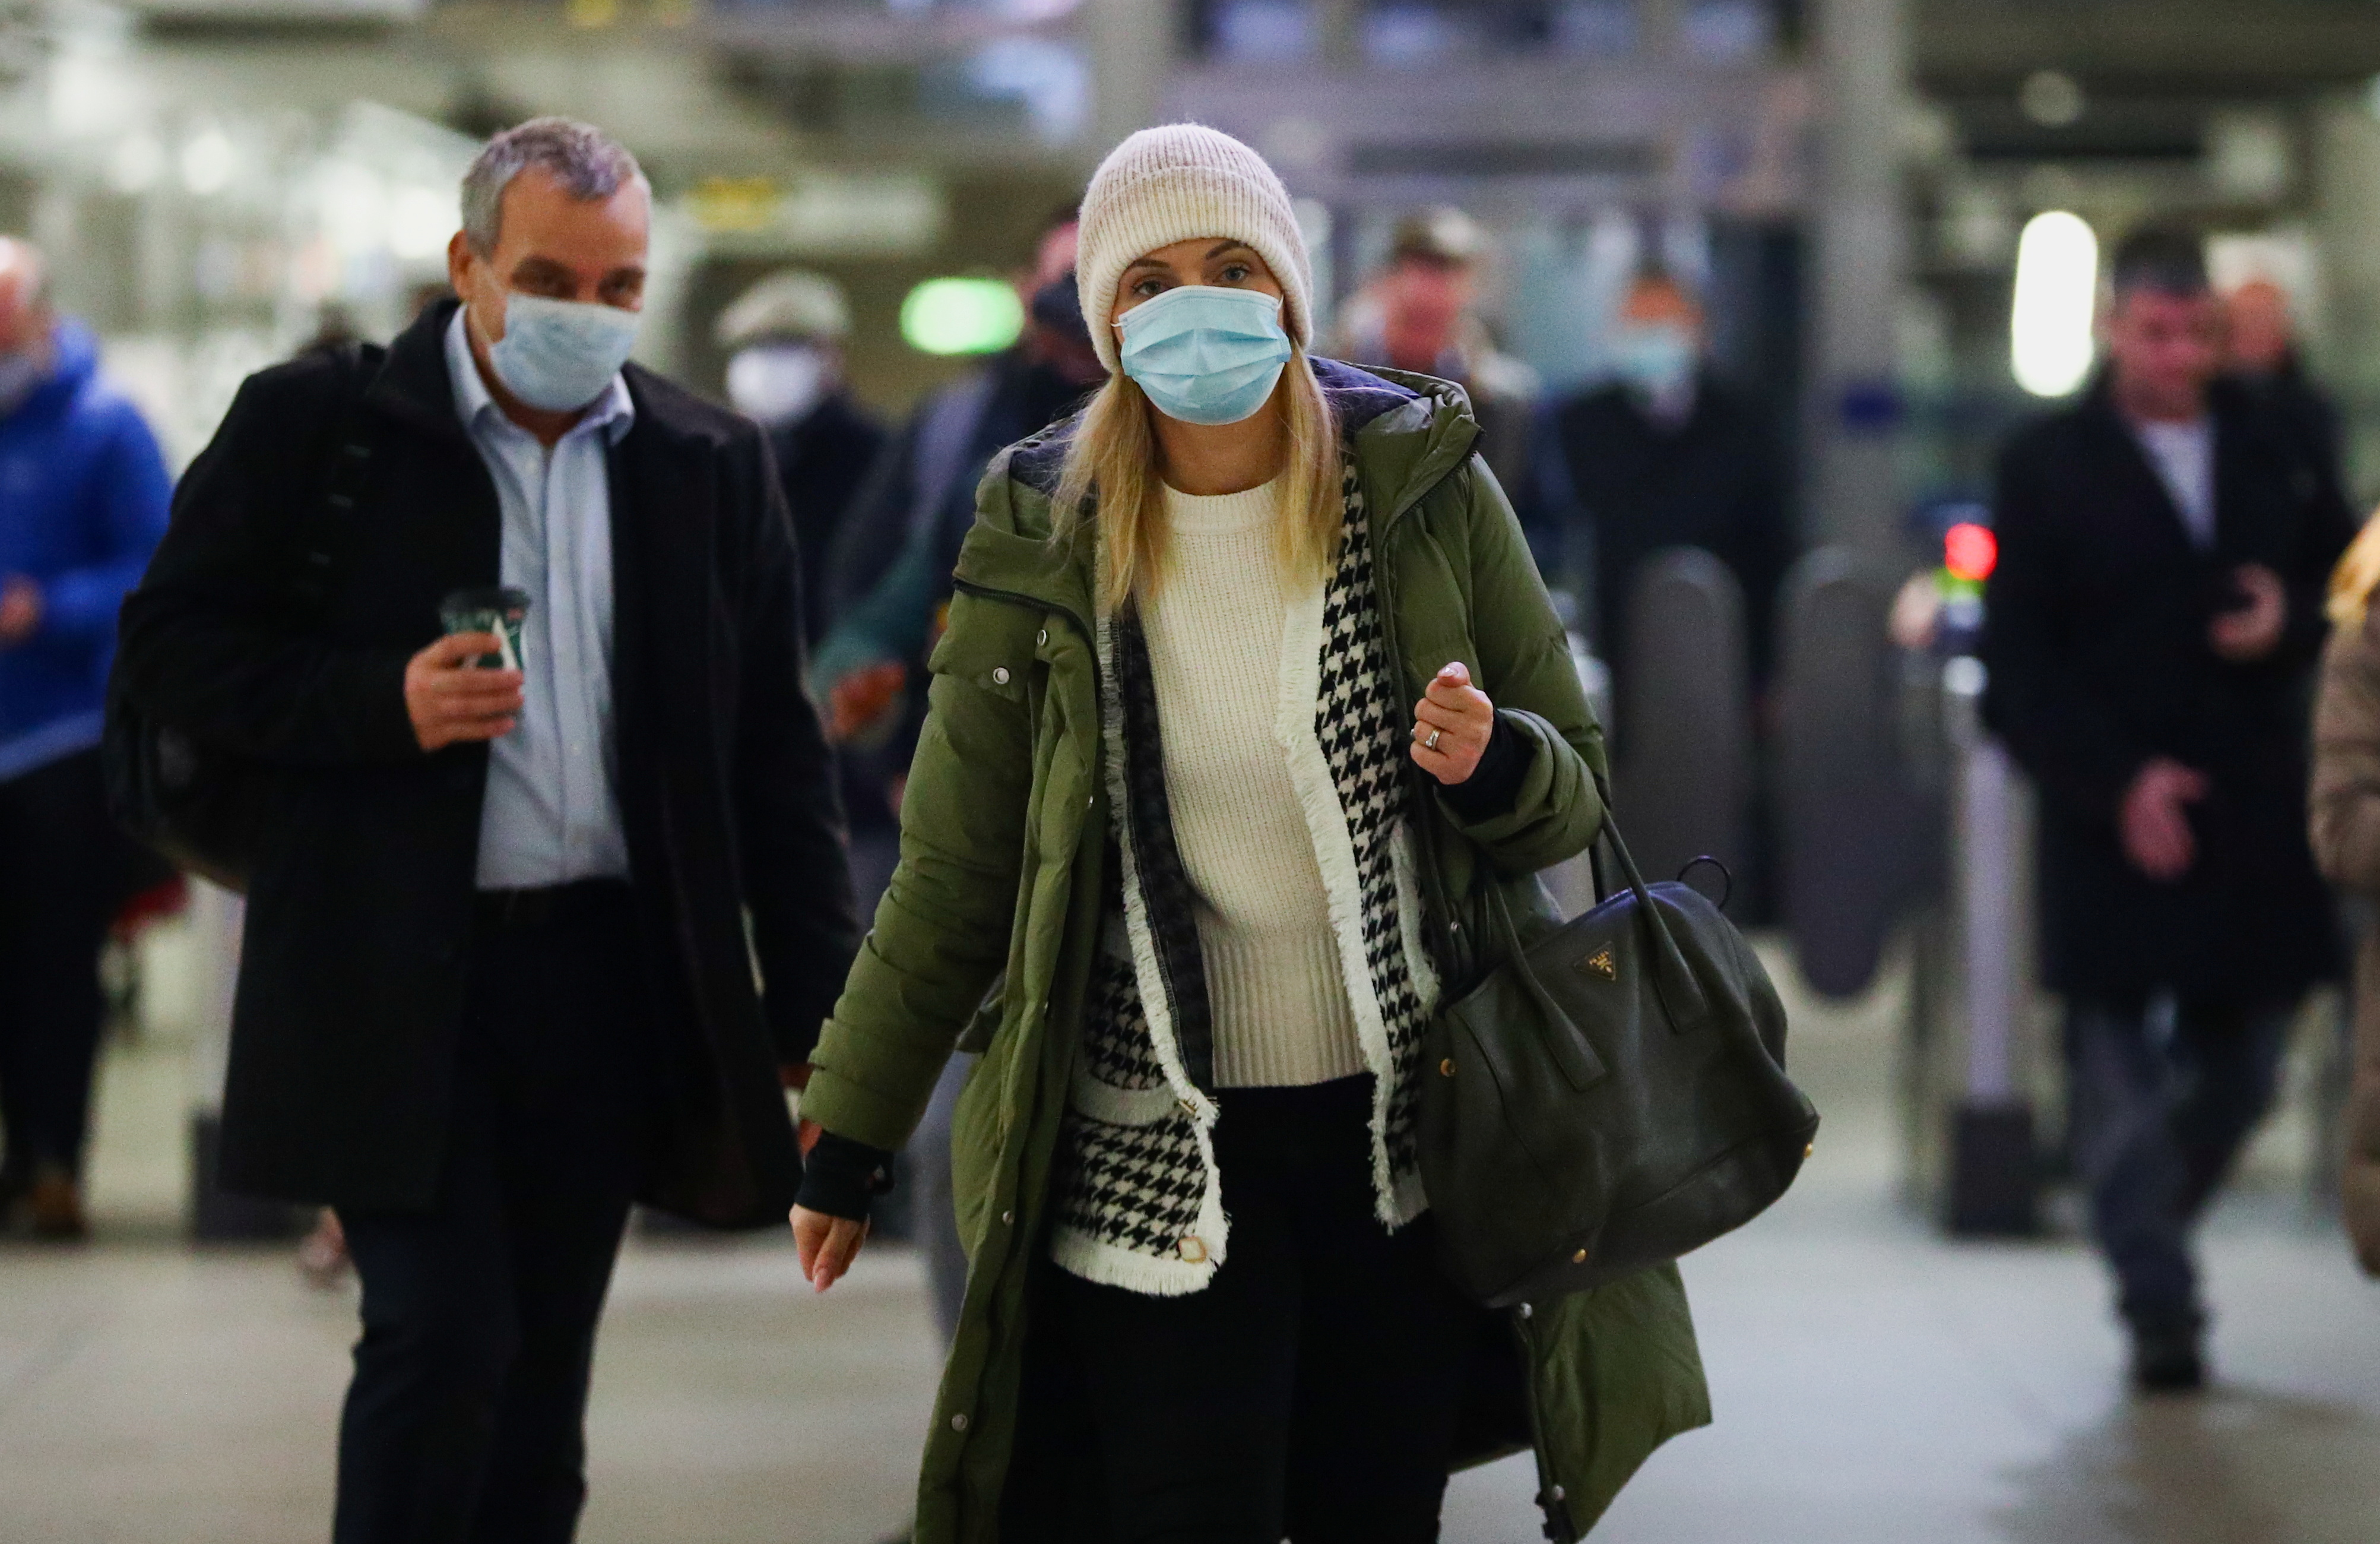 People wear face masks on the London underground, as the spread of the coronavirus disease (COVID-19) continues in London, Britain, November 30, 2021. REUTERS/Hannah McKay